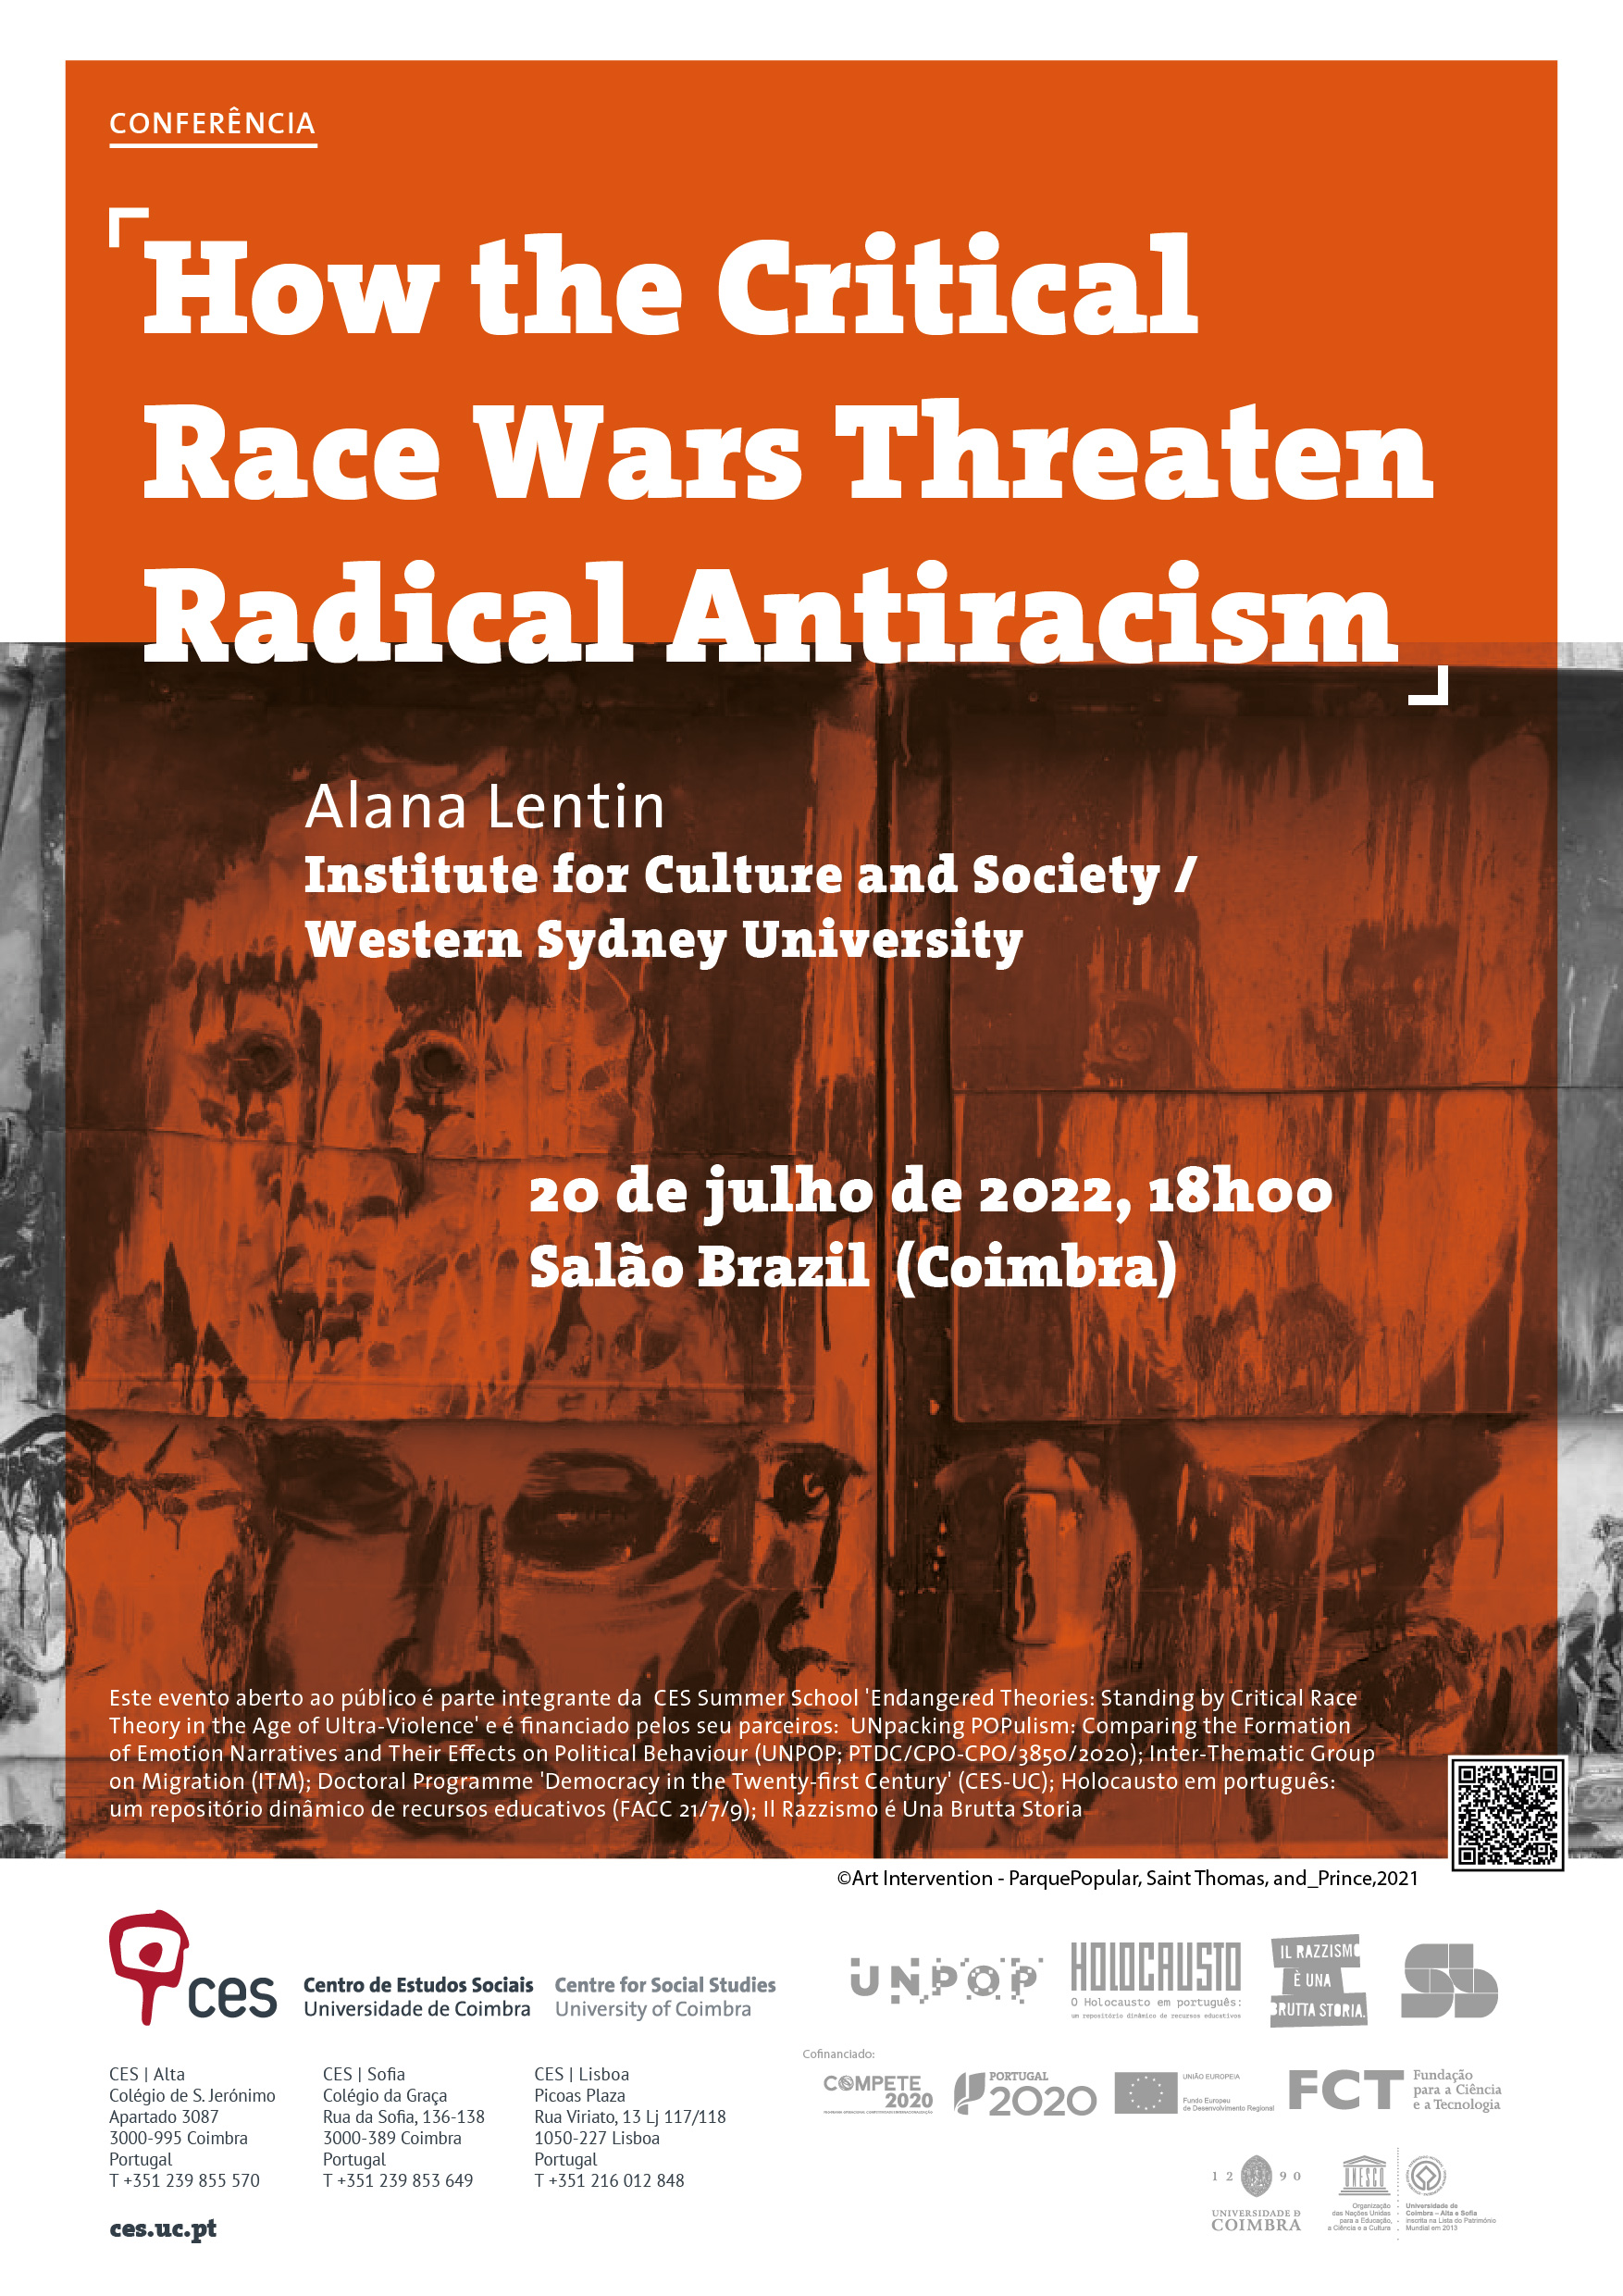 How the Critical Race Wars Threaten Radical Antiracism <span id="edit_39361"><script>$(function() { $('#edit_39361').load( "/myces/user/editobj.php?tipo=evento&id=39361" ); });</script></span>